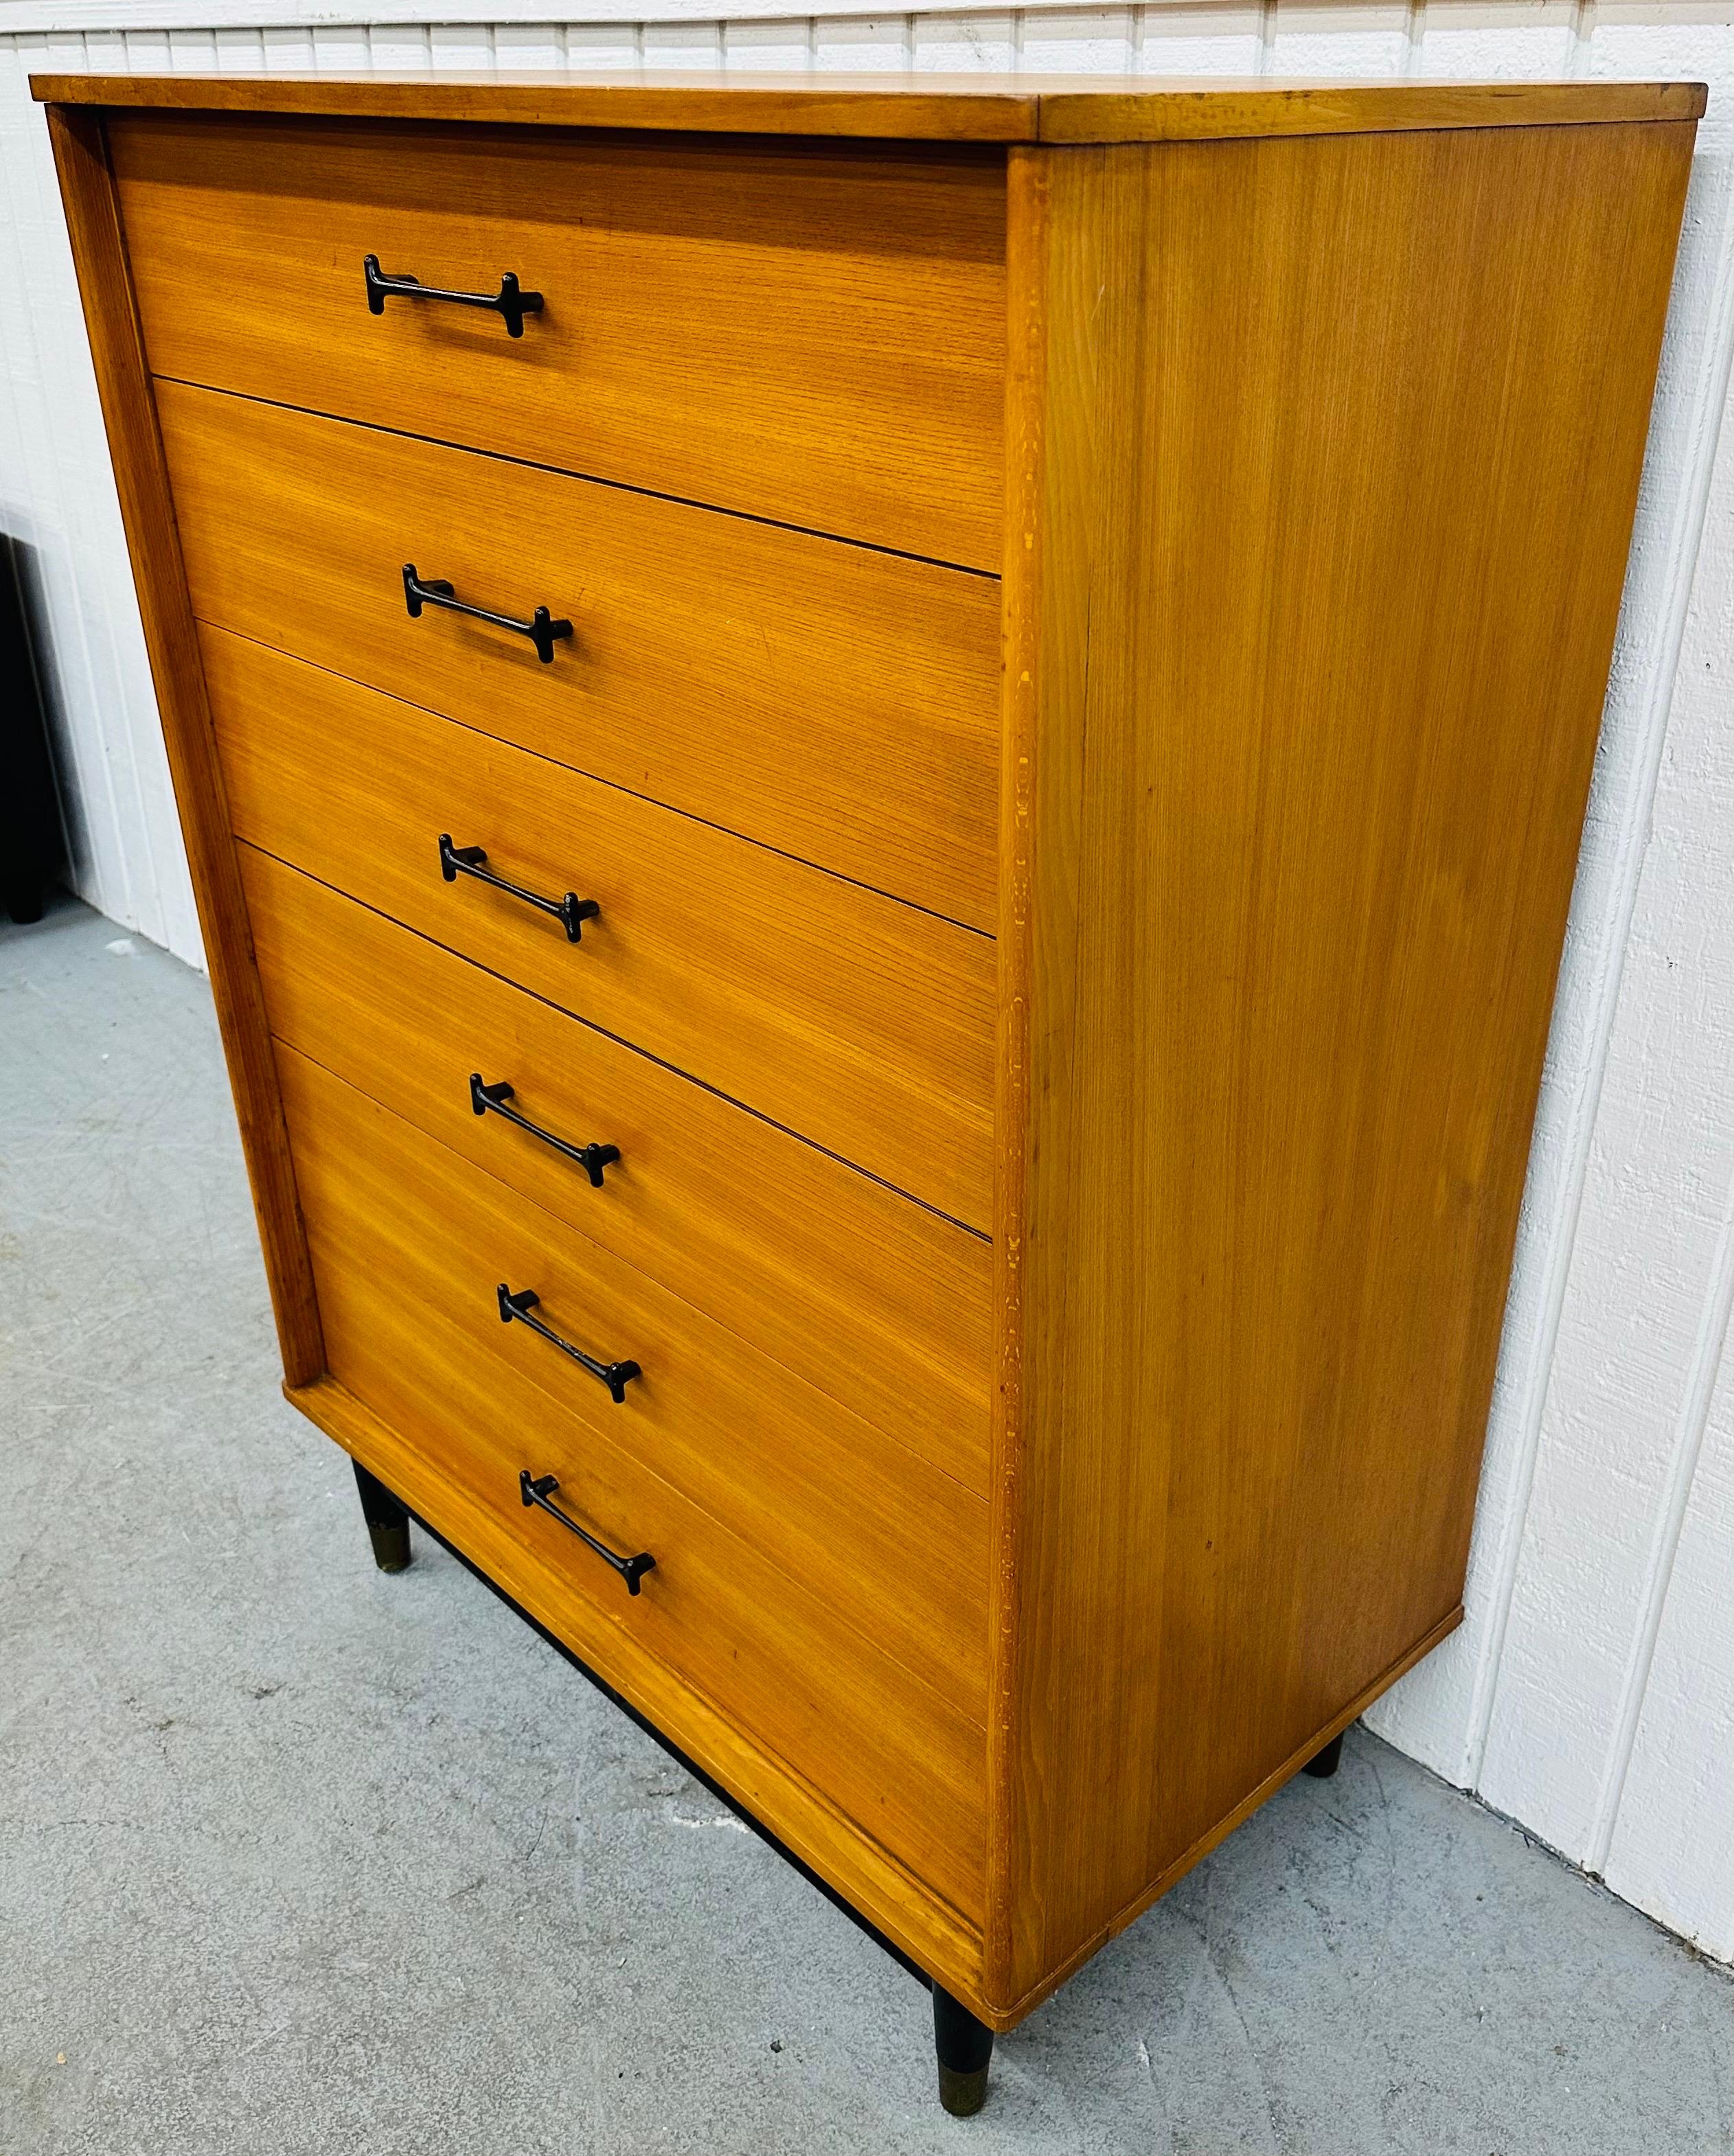 This listing is for a Mid-Century Modern Drexel Blonde High Chest. Featuring a straight line design attributed to designer Milo Baughman, six drawers for storage, sculpted black pulls, black legs with brass caps, and a beautiful blonde finish. This